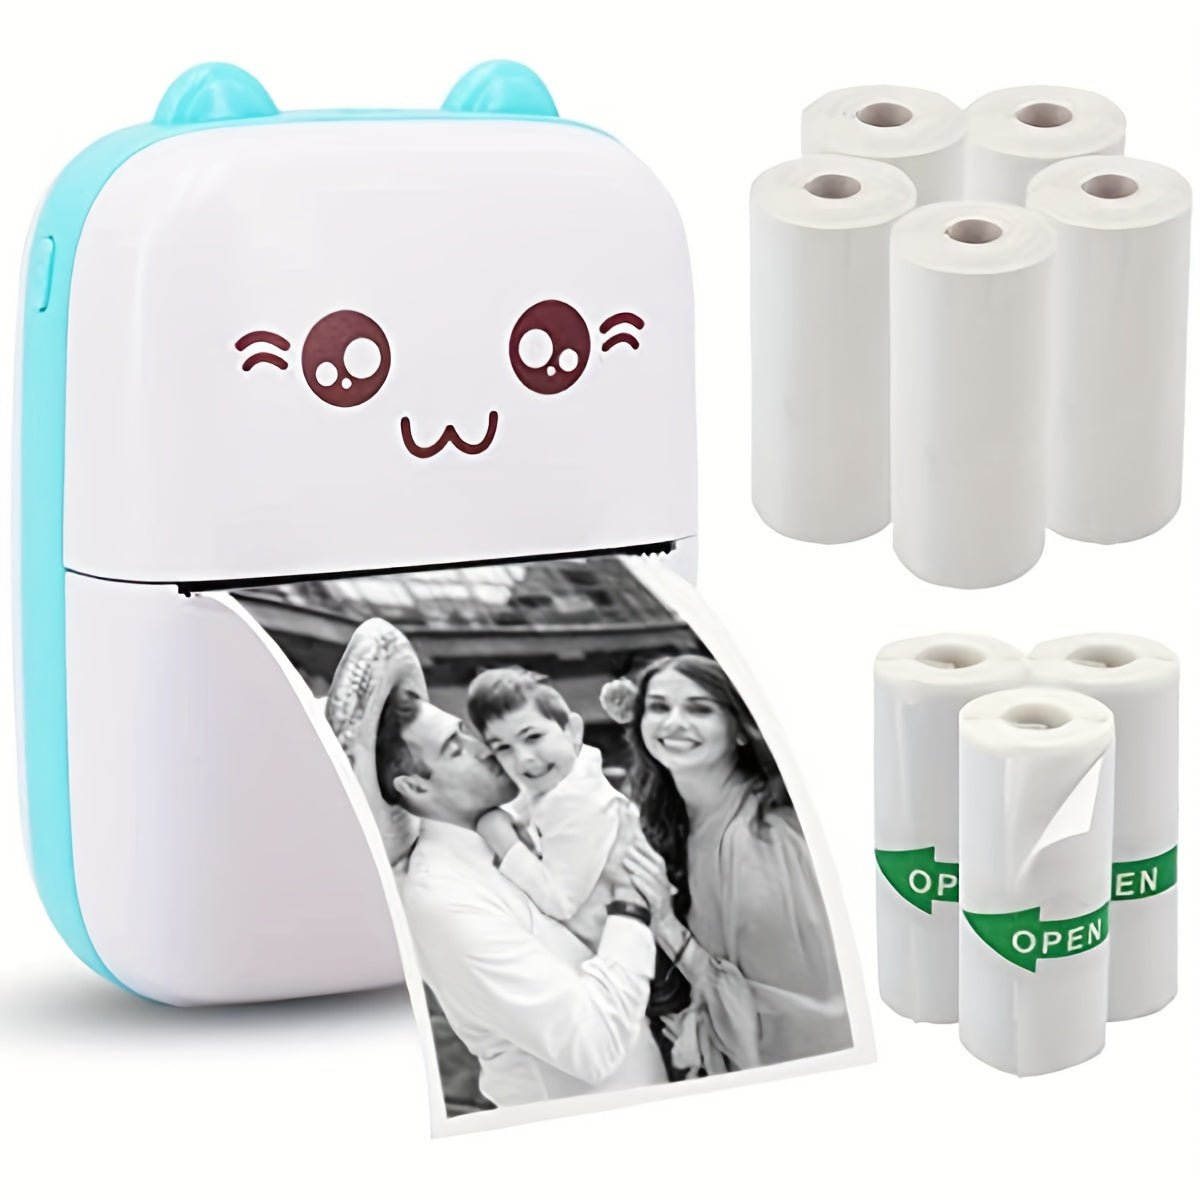 Mini Pocket Printer, Portable Thermal Printer  For Android Or IOS APP,Inkless Printer Gift Friends